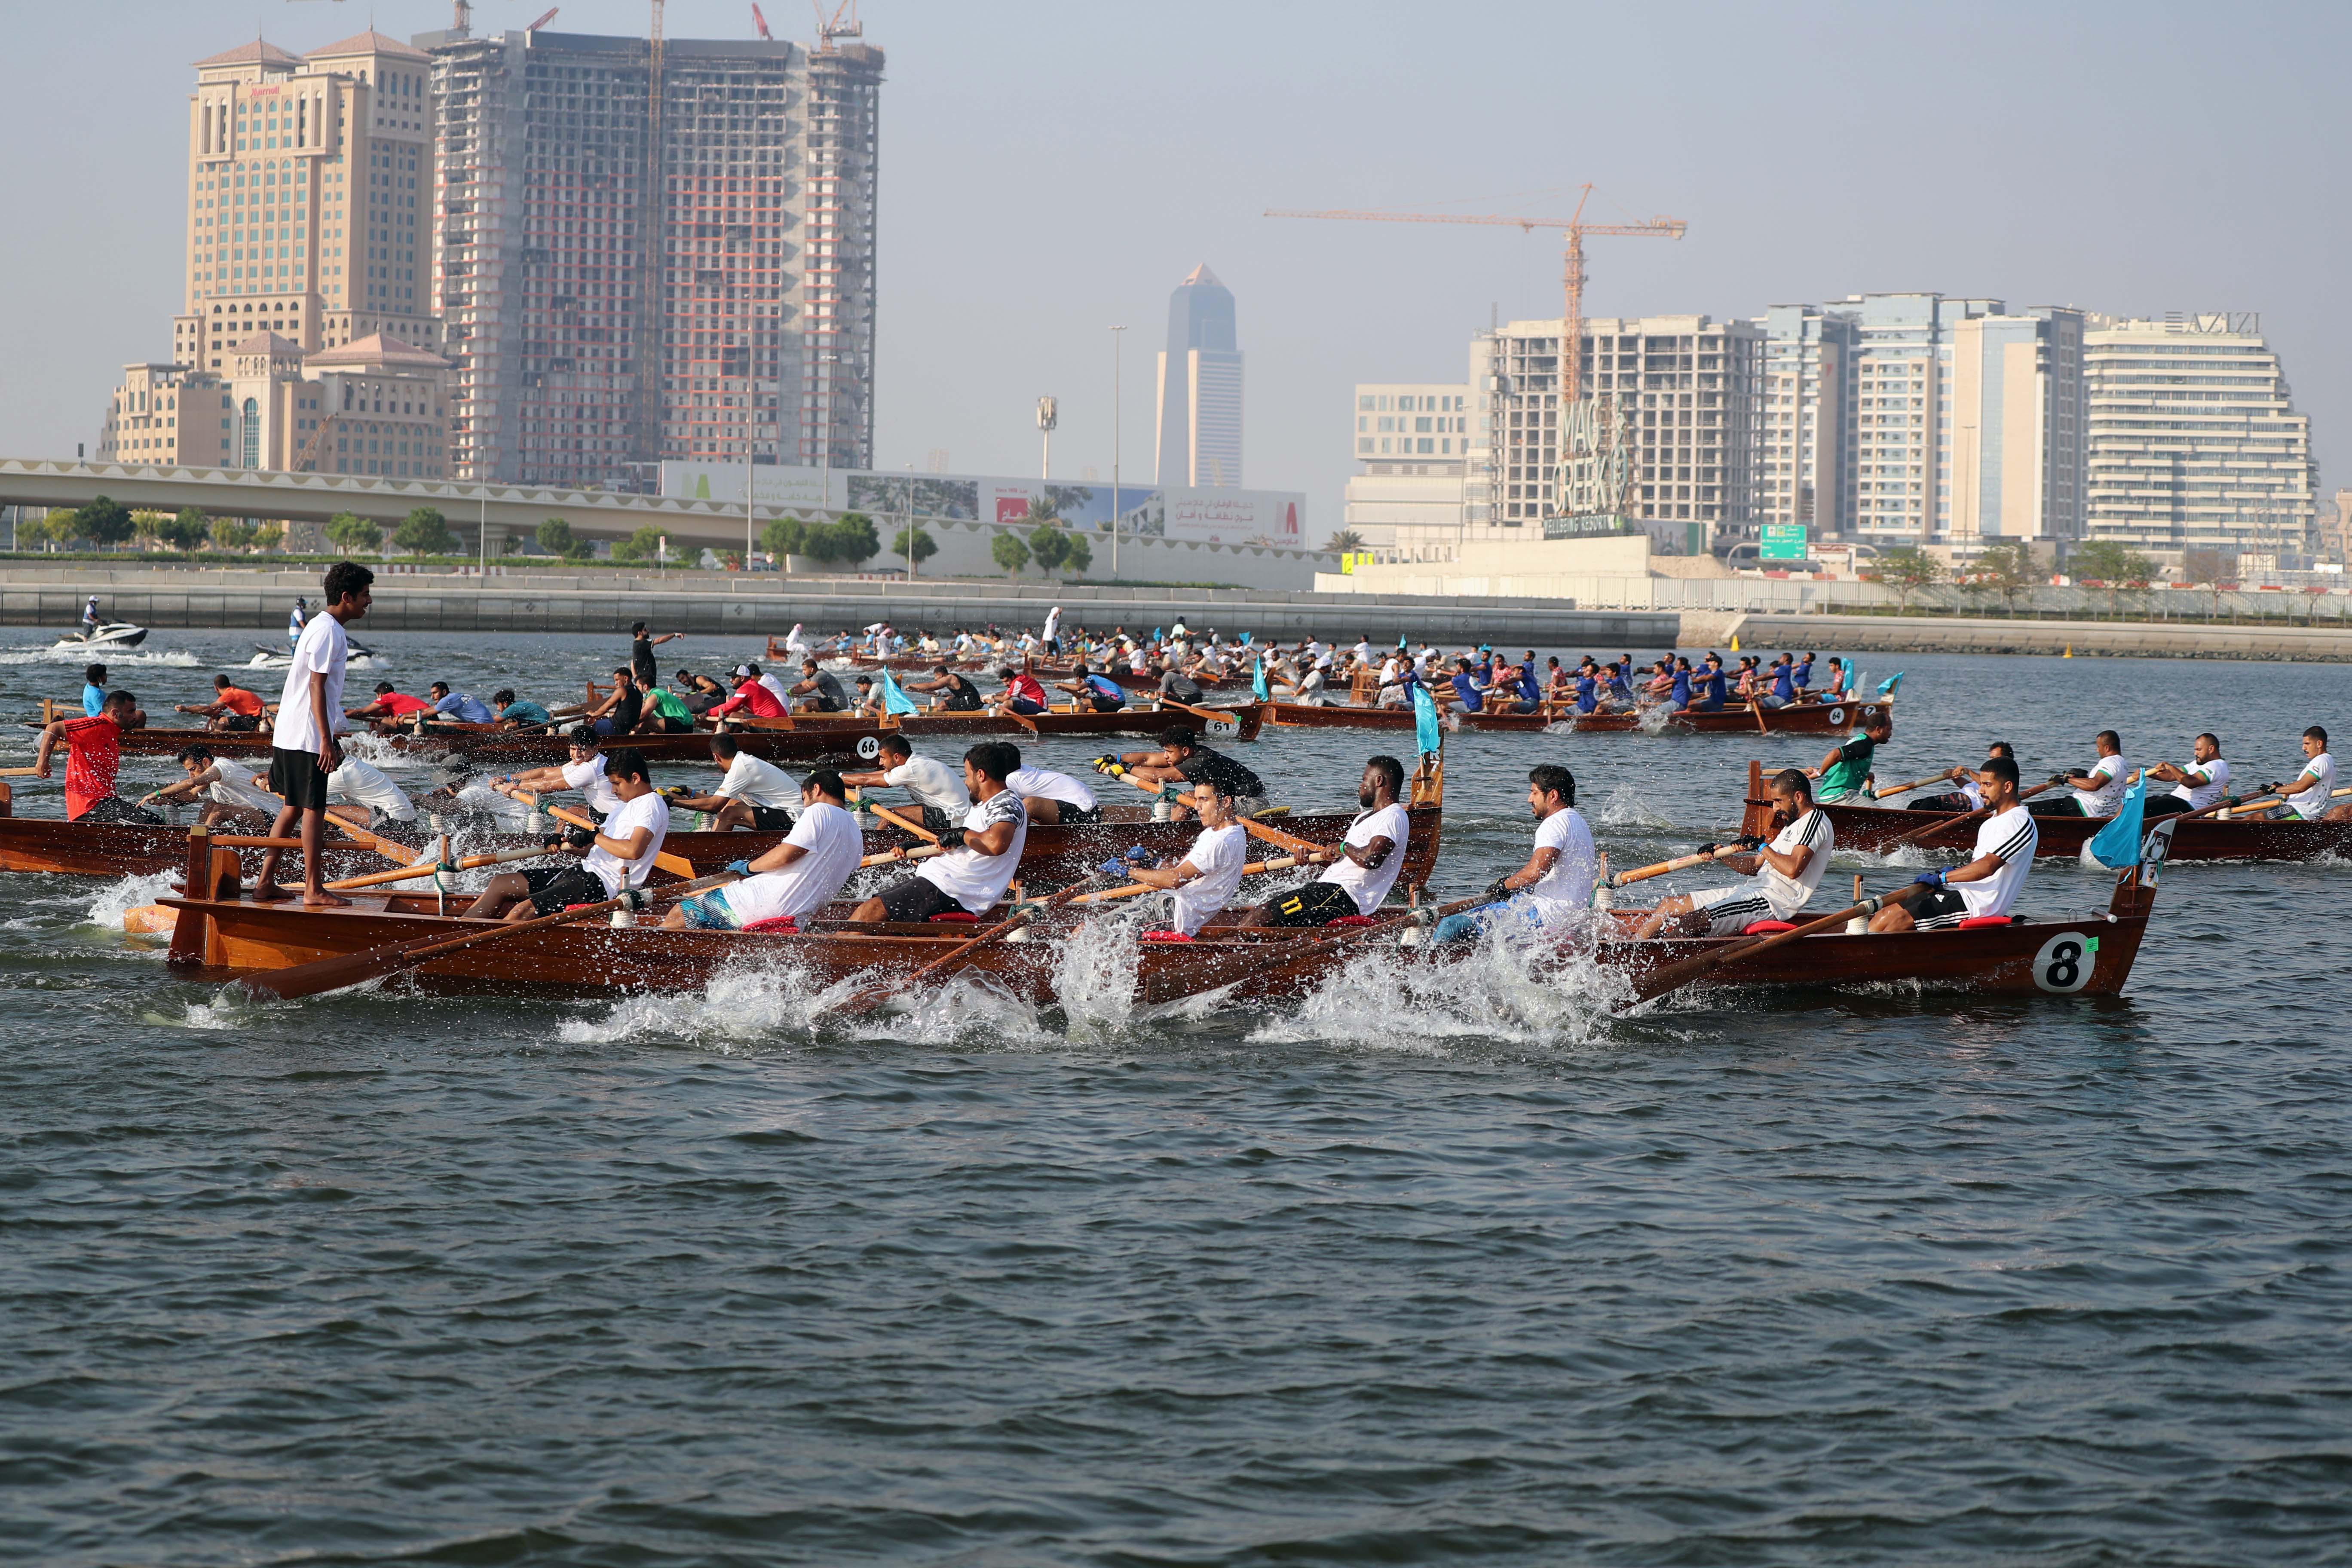 Second Round of Traditional Rowing Race on Saturday at Dubai Canal